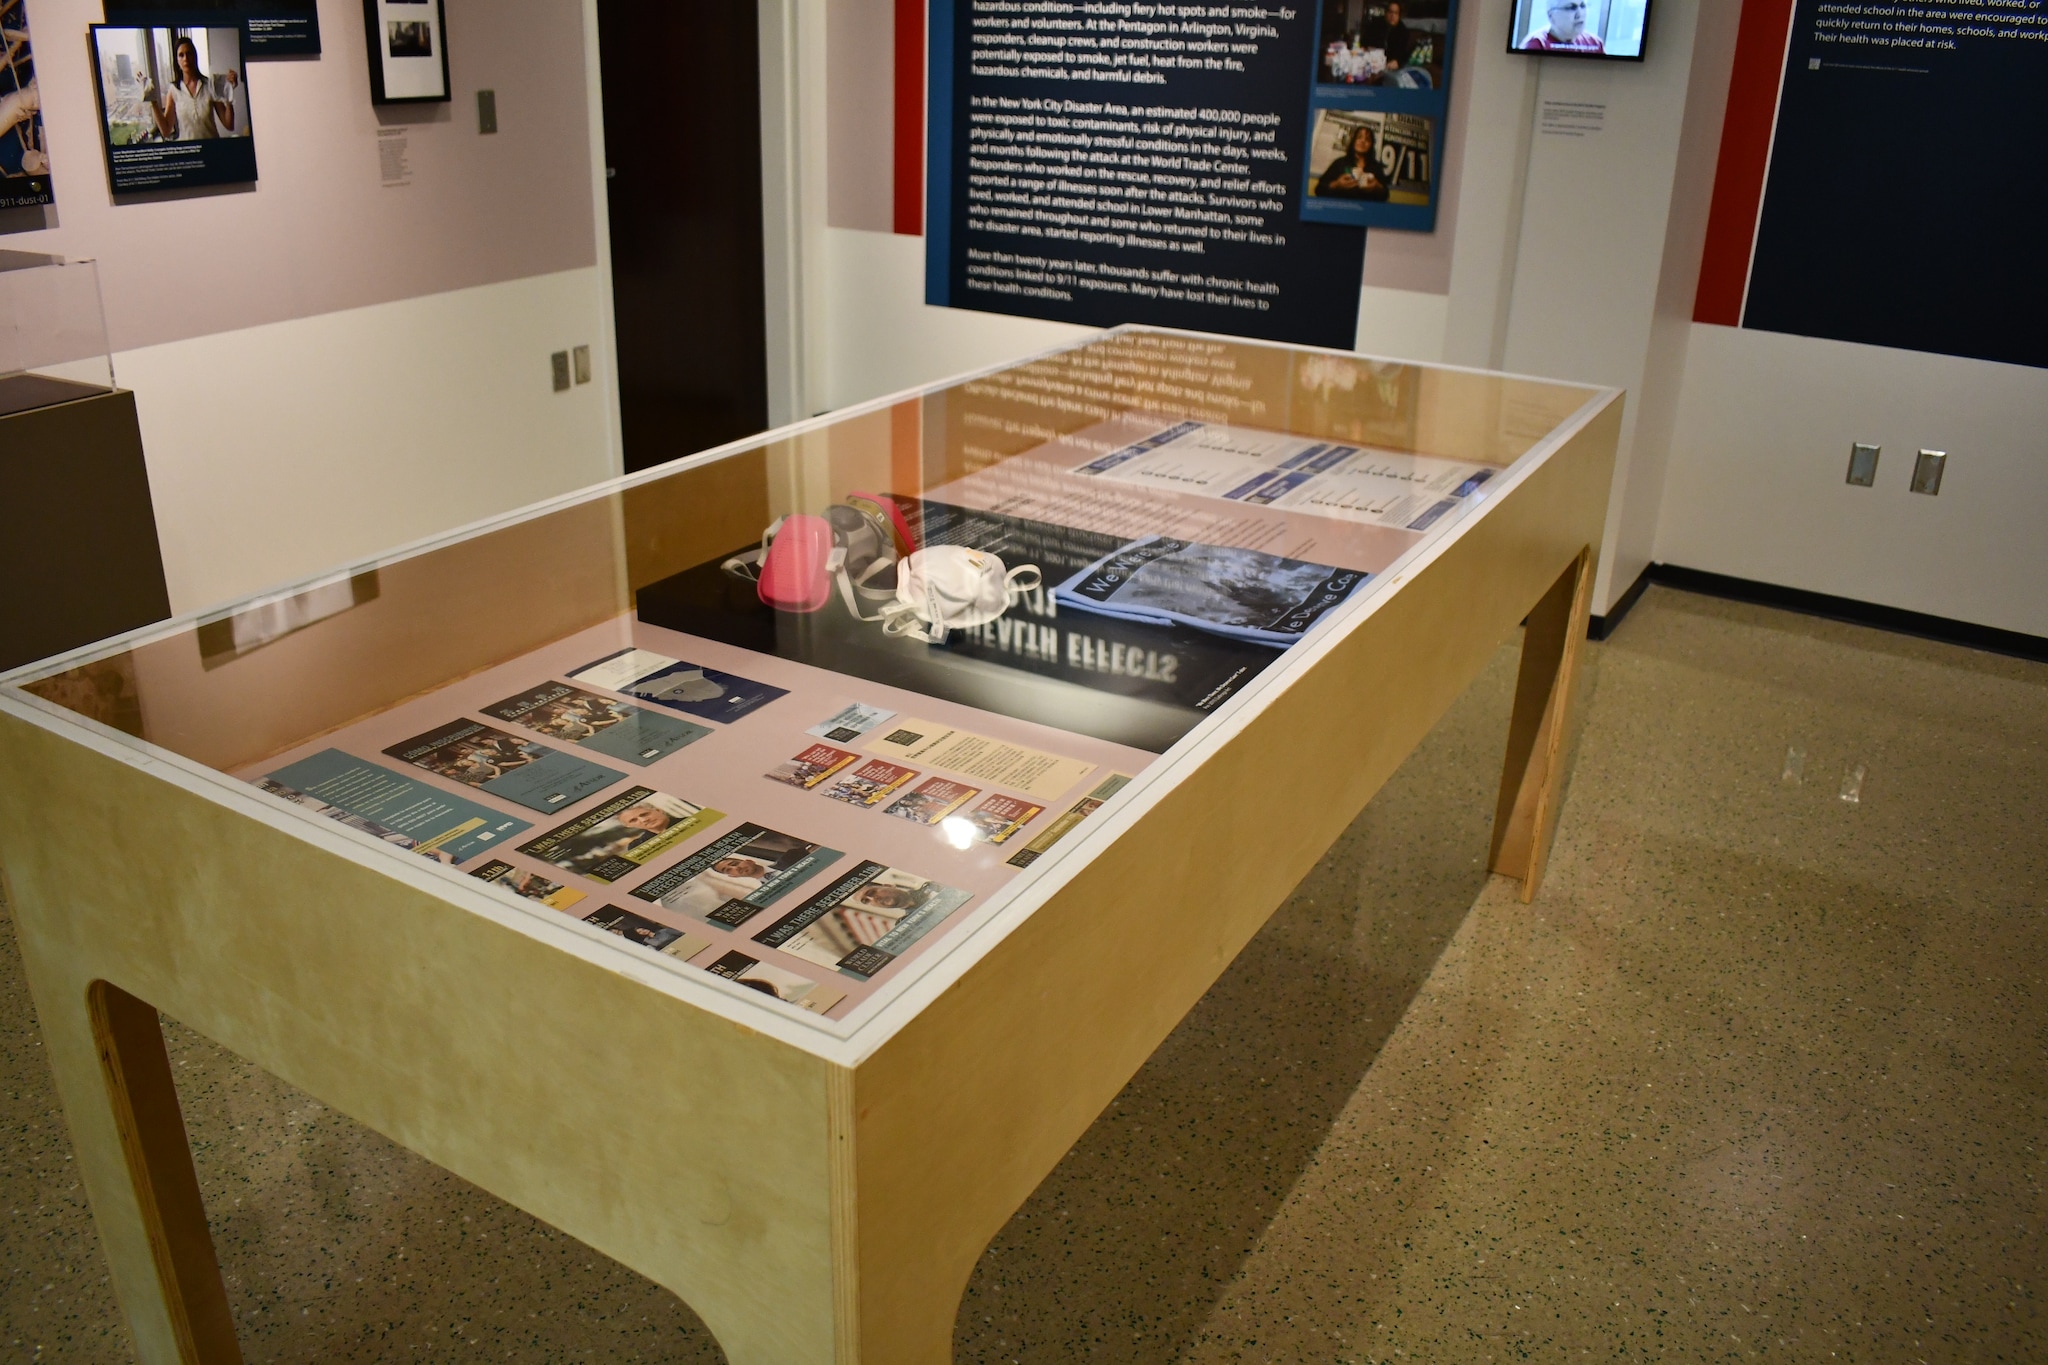 A glass case featuring information and artifacts from the Health Effects of 9/11 Exhibition.